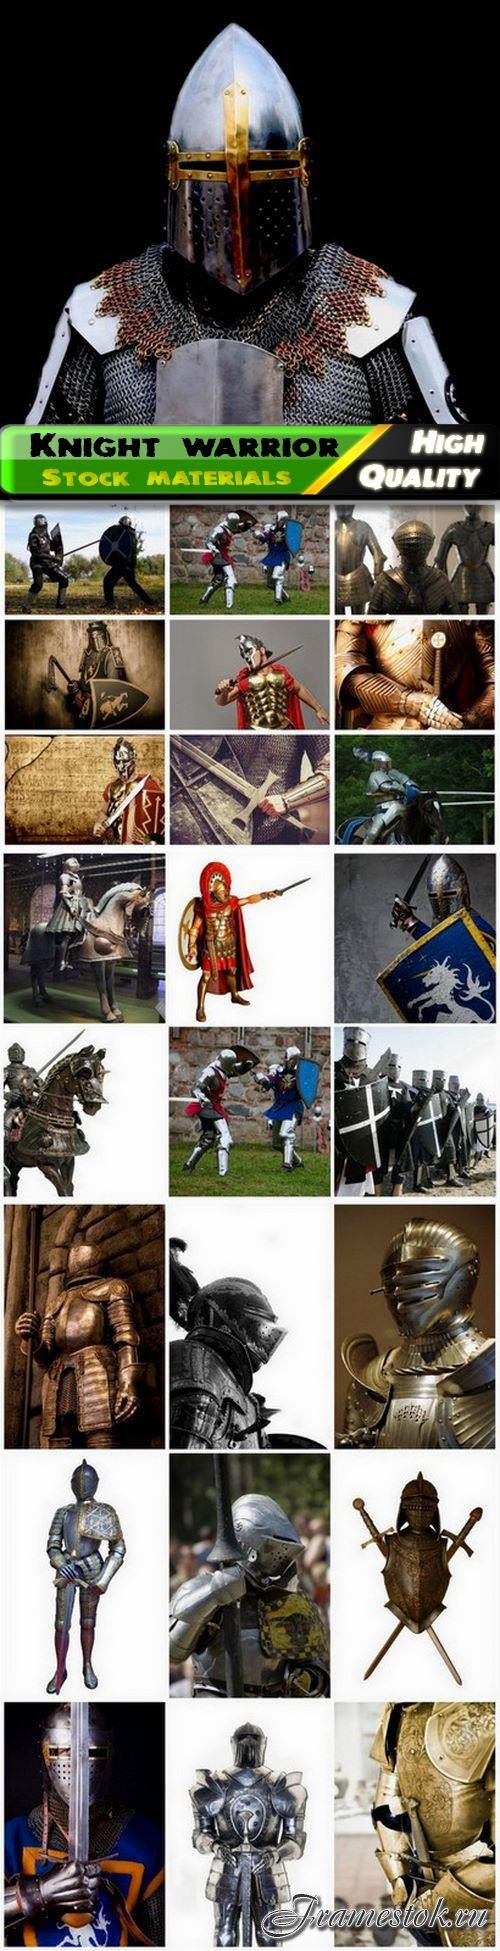 Knight warrior in armor with sword and shield - 25 HQ Jpg